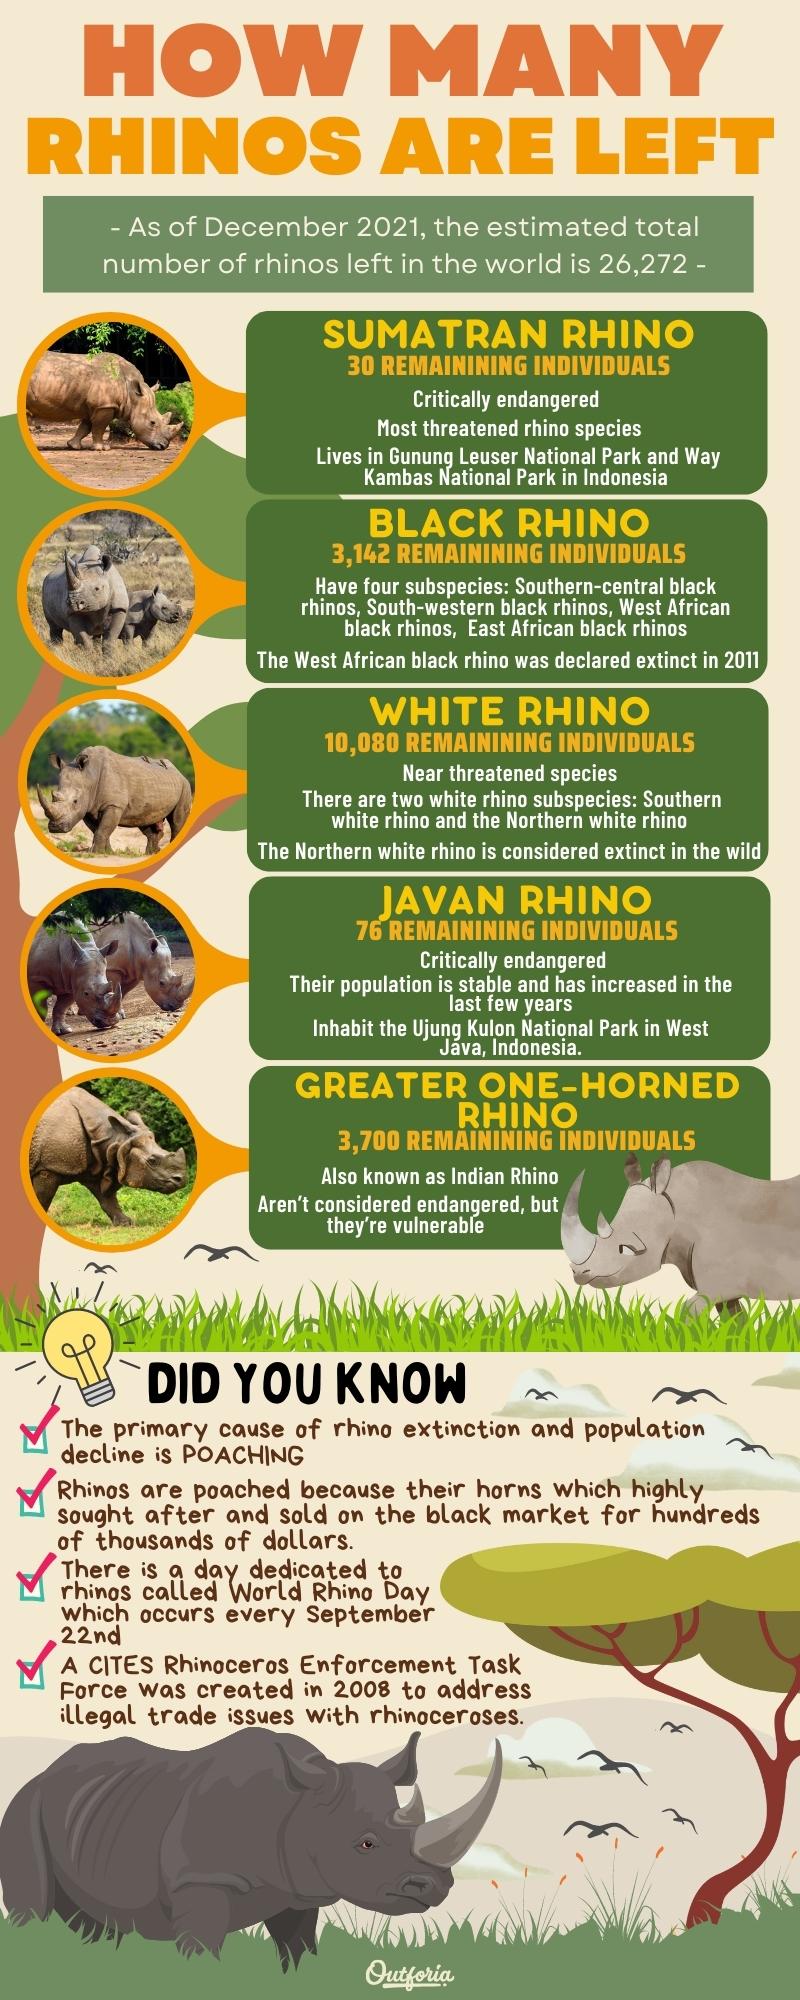 chart about how many rhinos are left with facts and images